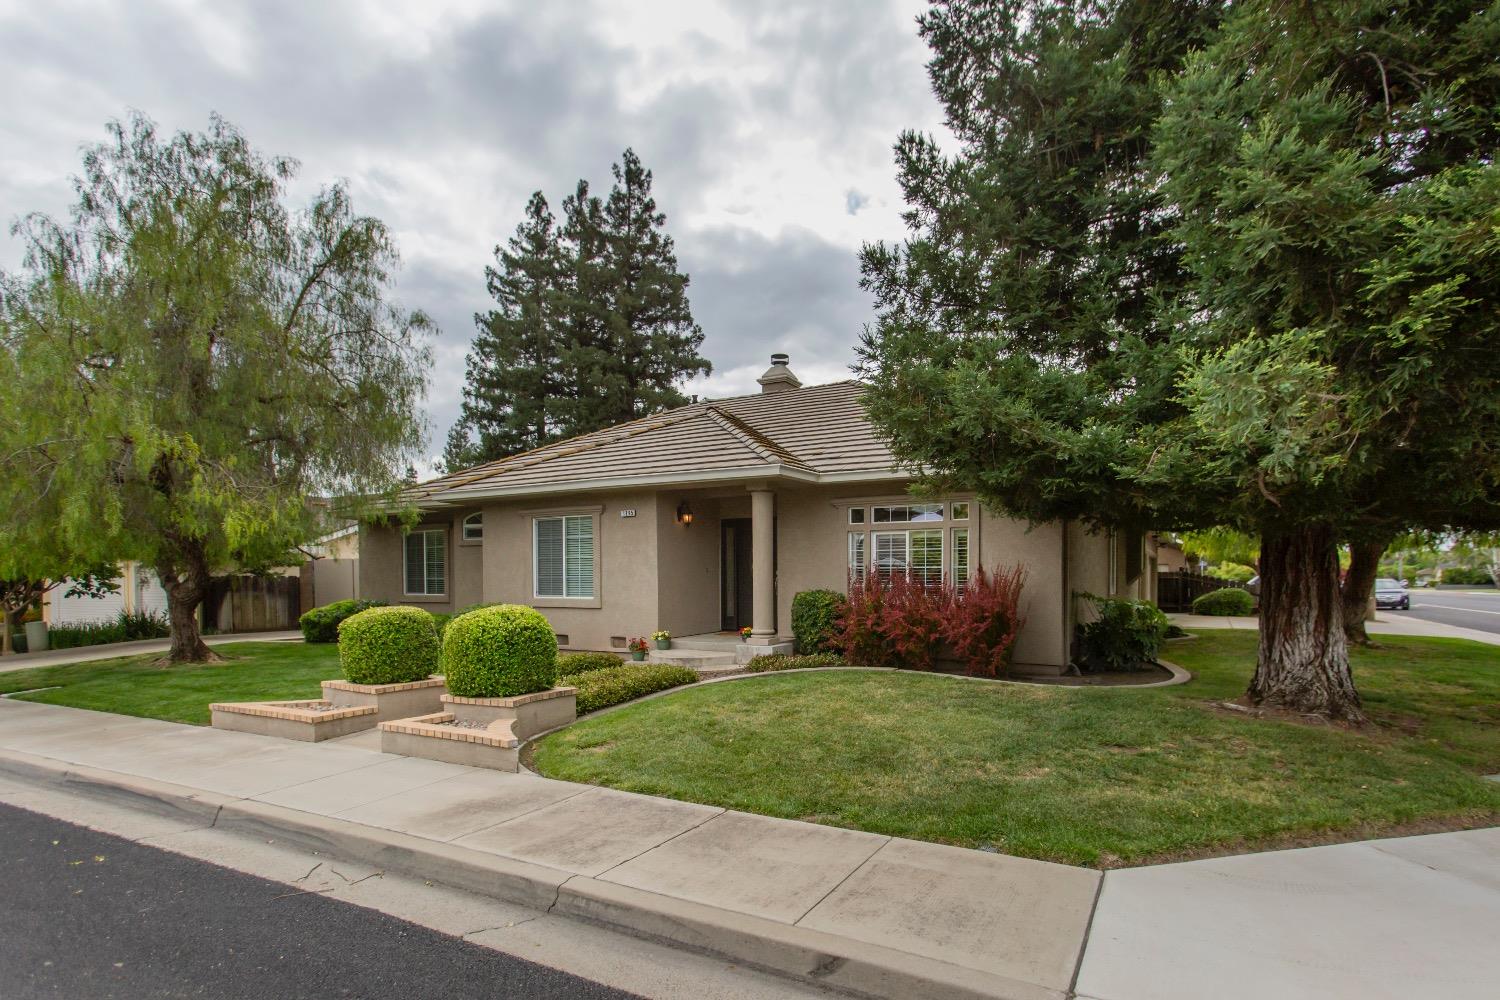 Photo of 1395 Valley View Dr in Turlock, CA